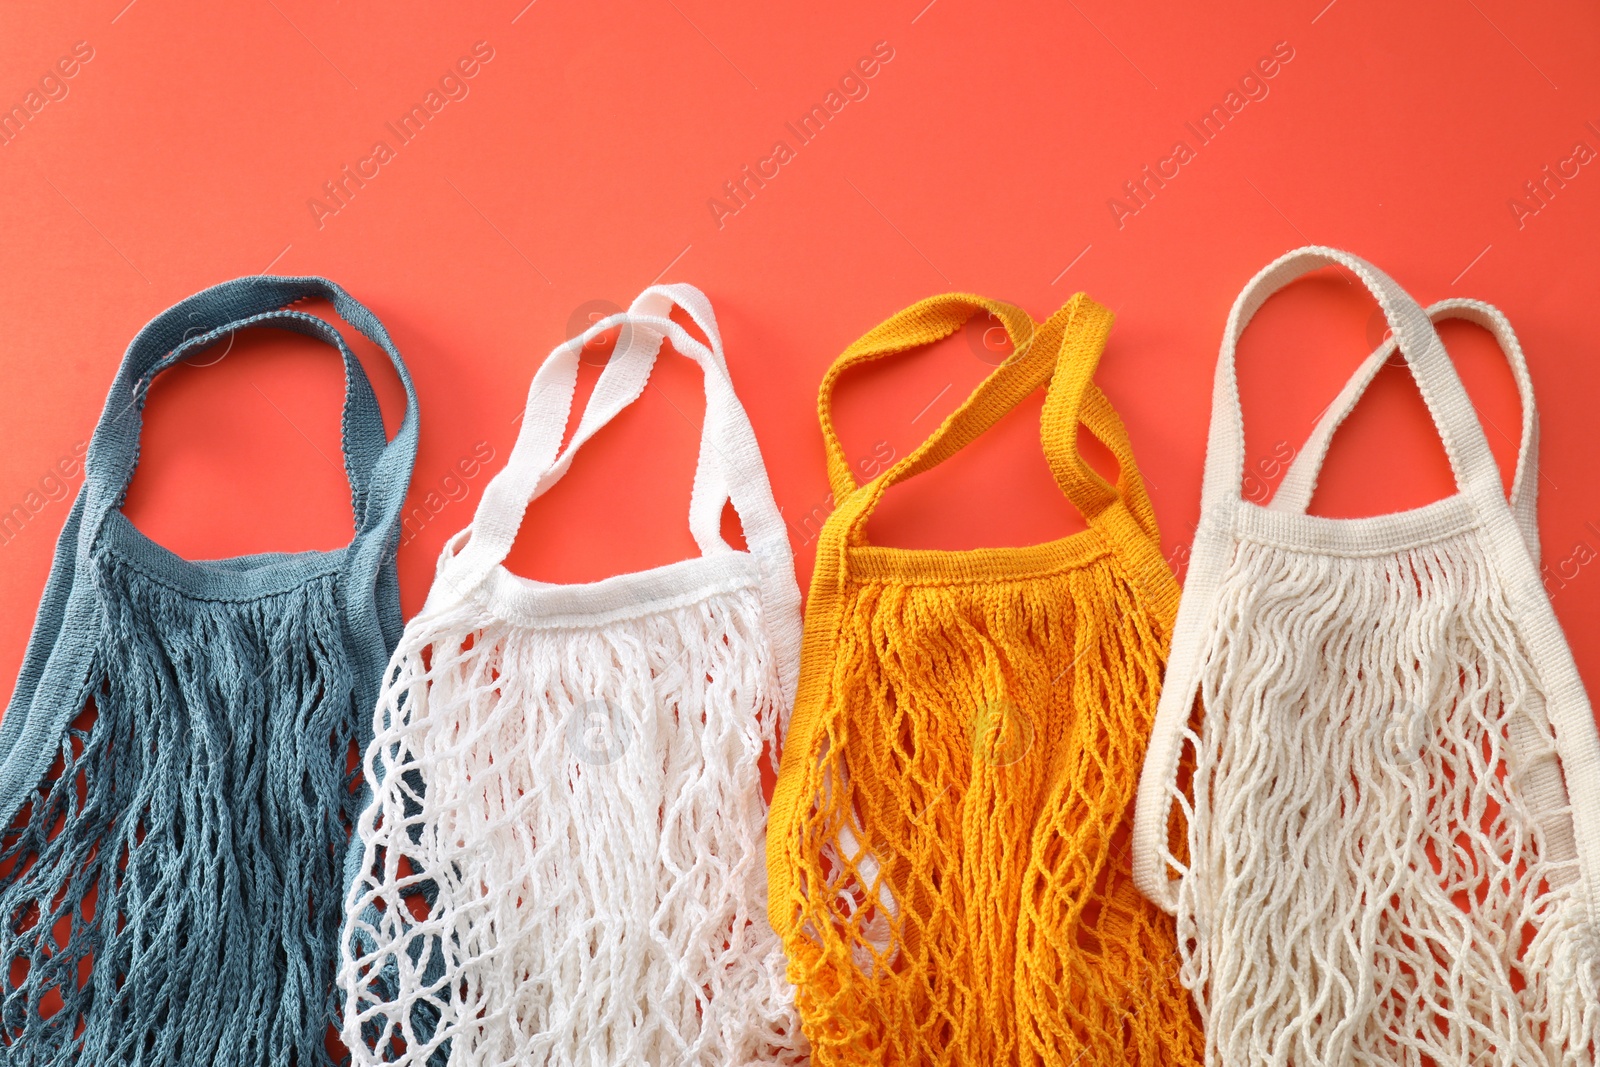 Photo of Different string bags on red background, top view